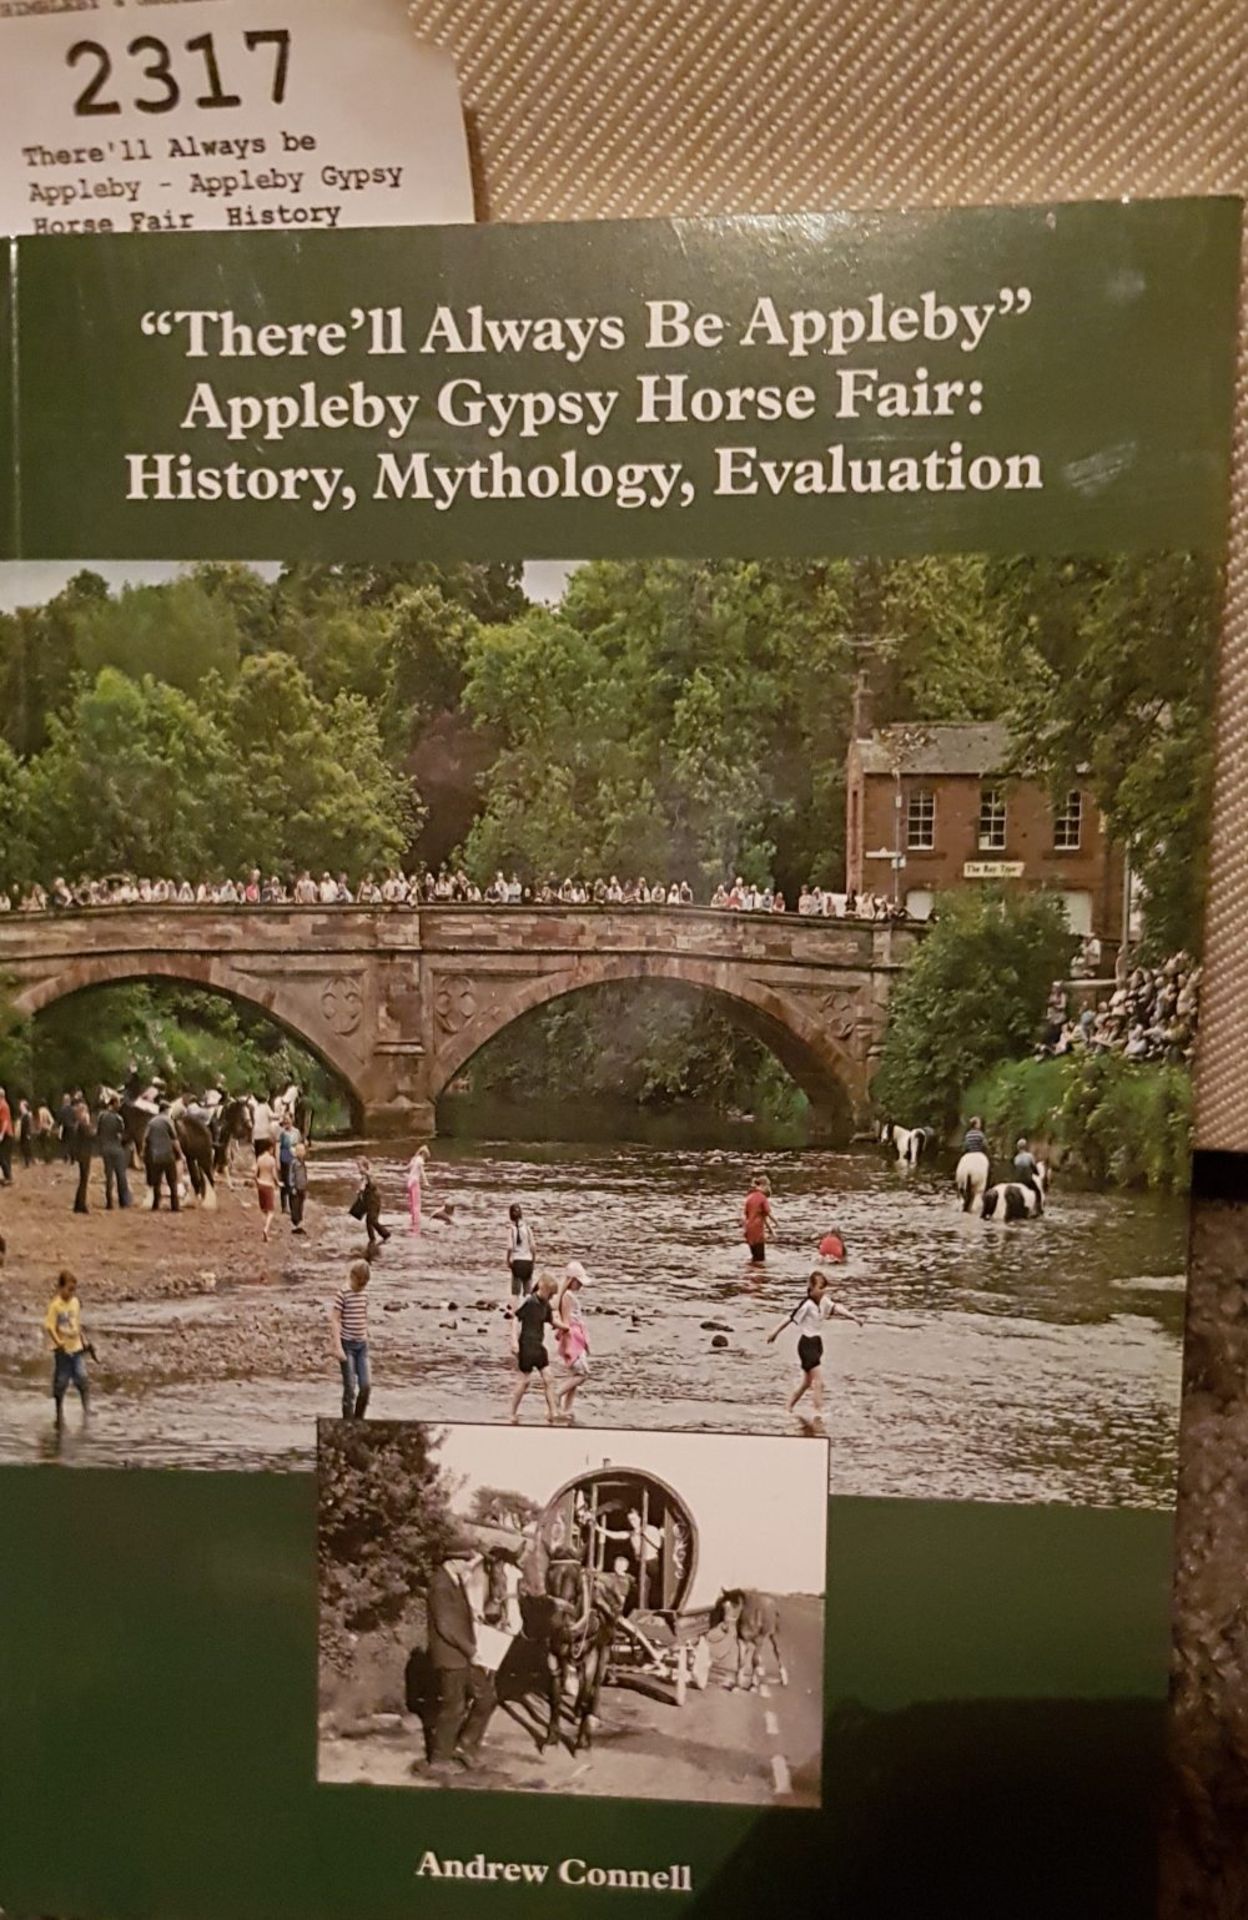 There'll Always be Appleby - Appleby Gypsy Horse Fair, History, Mythology, Evaluation by Andrew